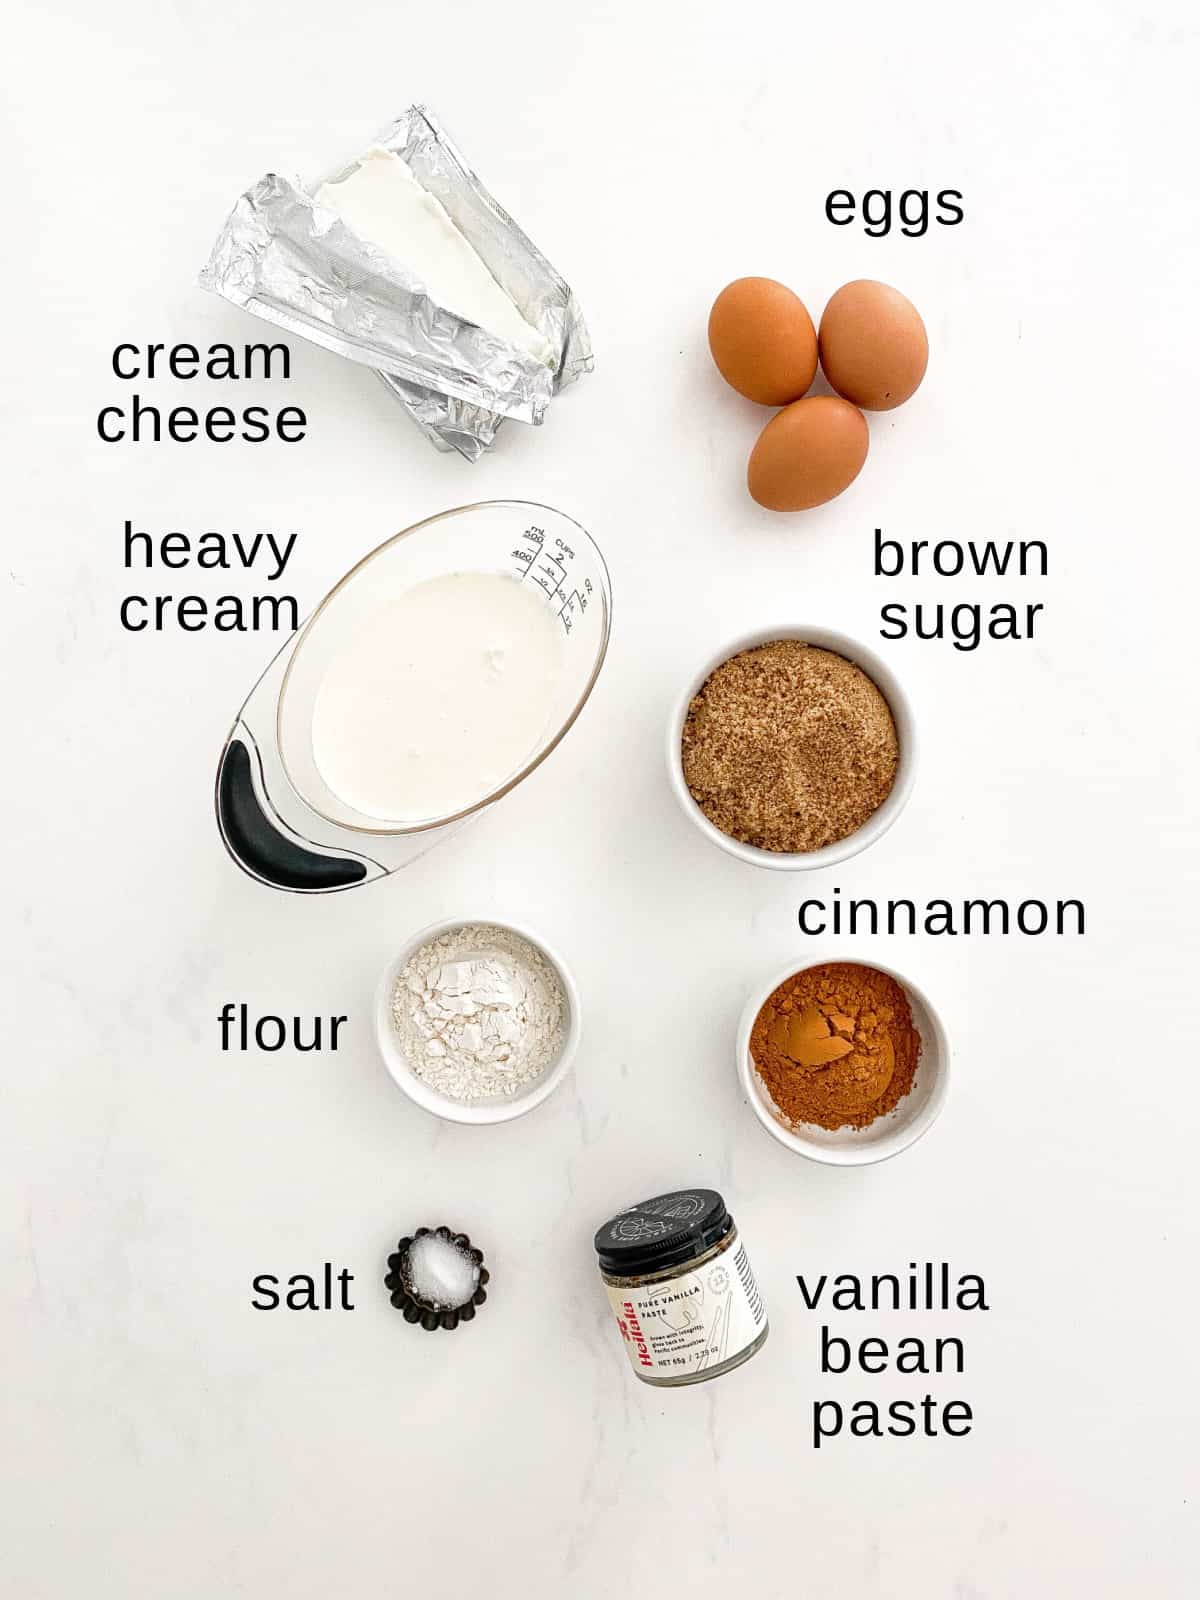 Cinnamon filling ingredients on a white background.